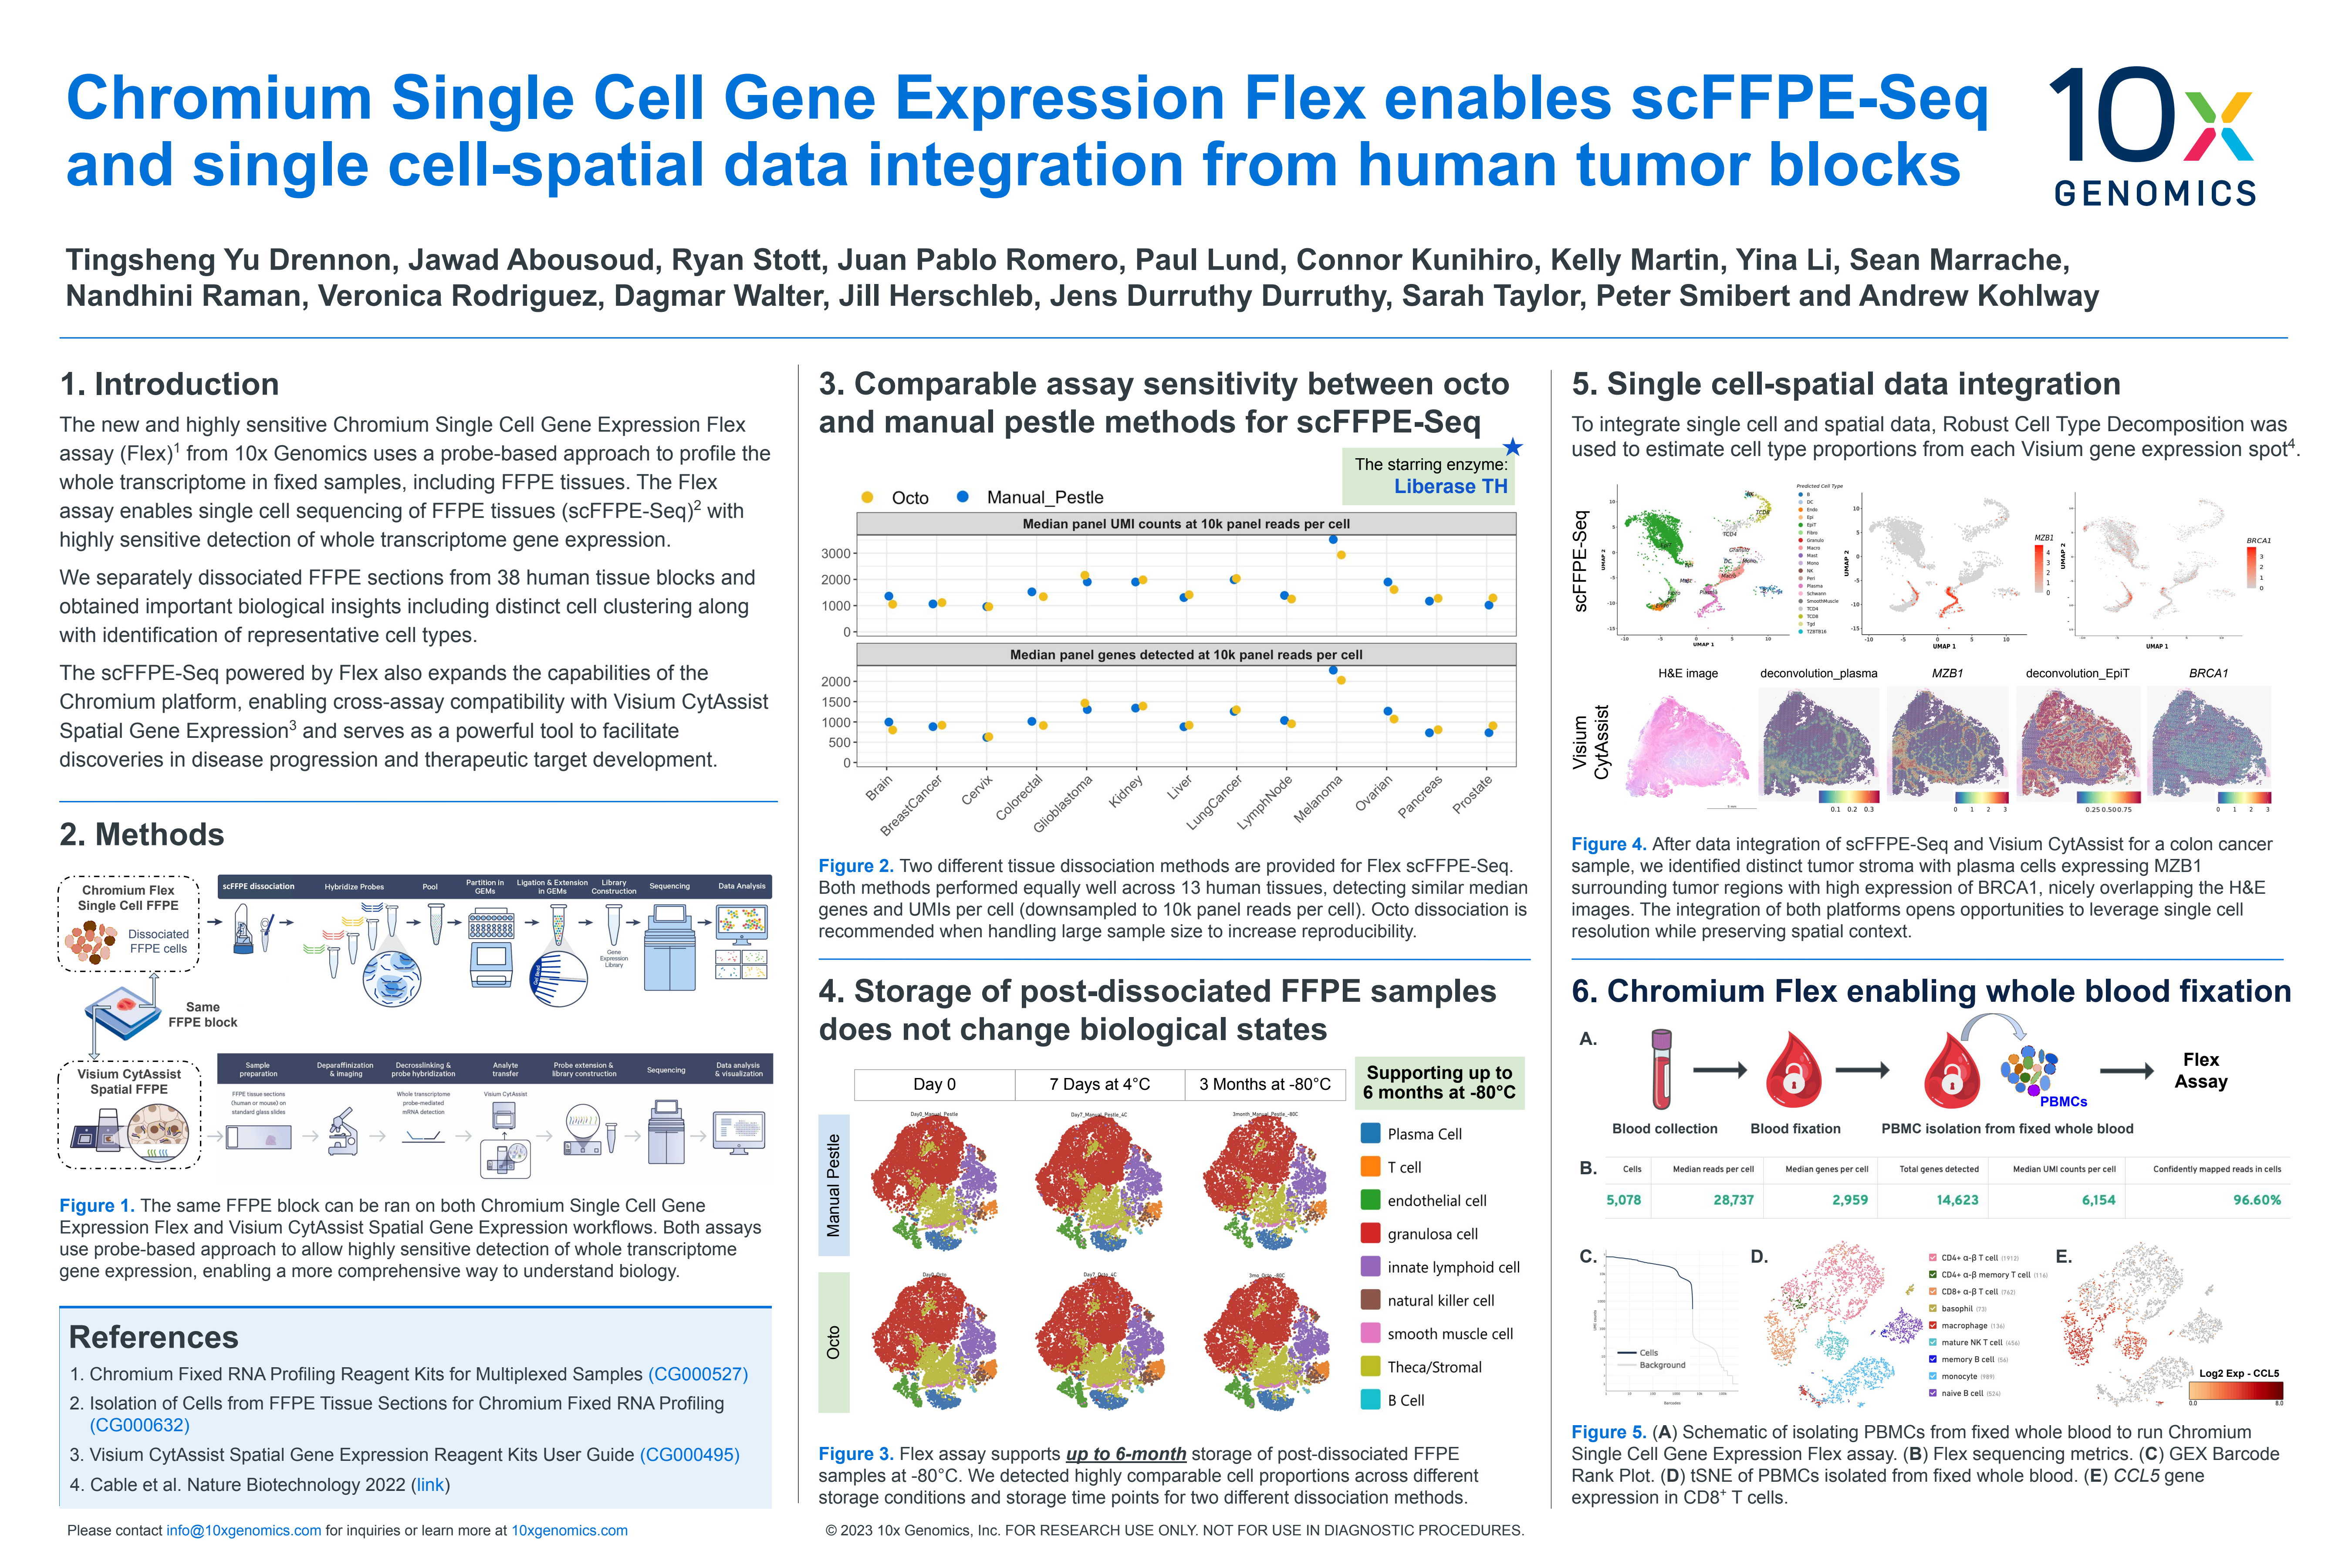 Chromium Single Cell Gene Expression Flex enables scFFPE-Seq and single cell-spatial data integration from human tumor blocks